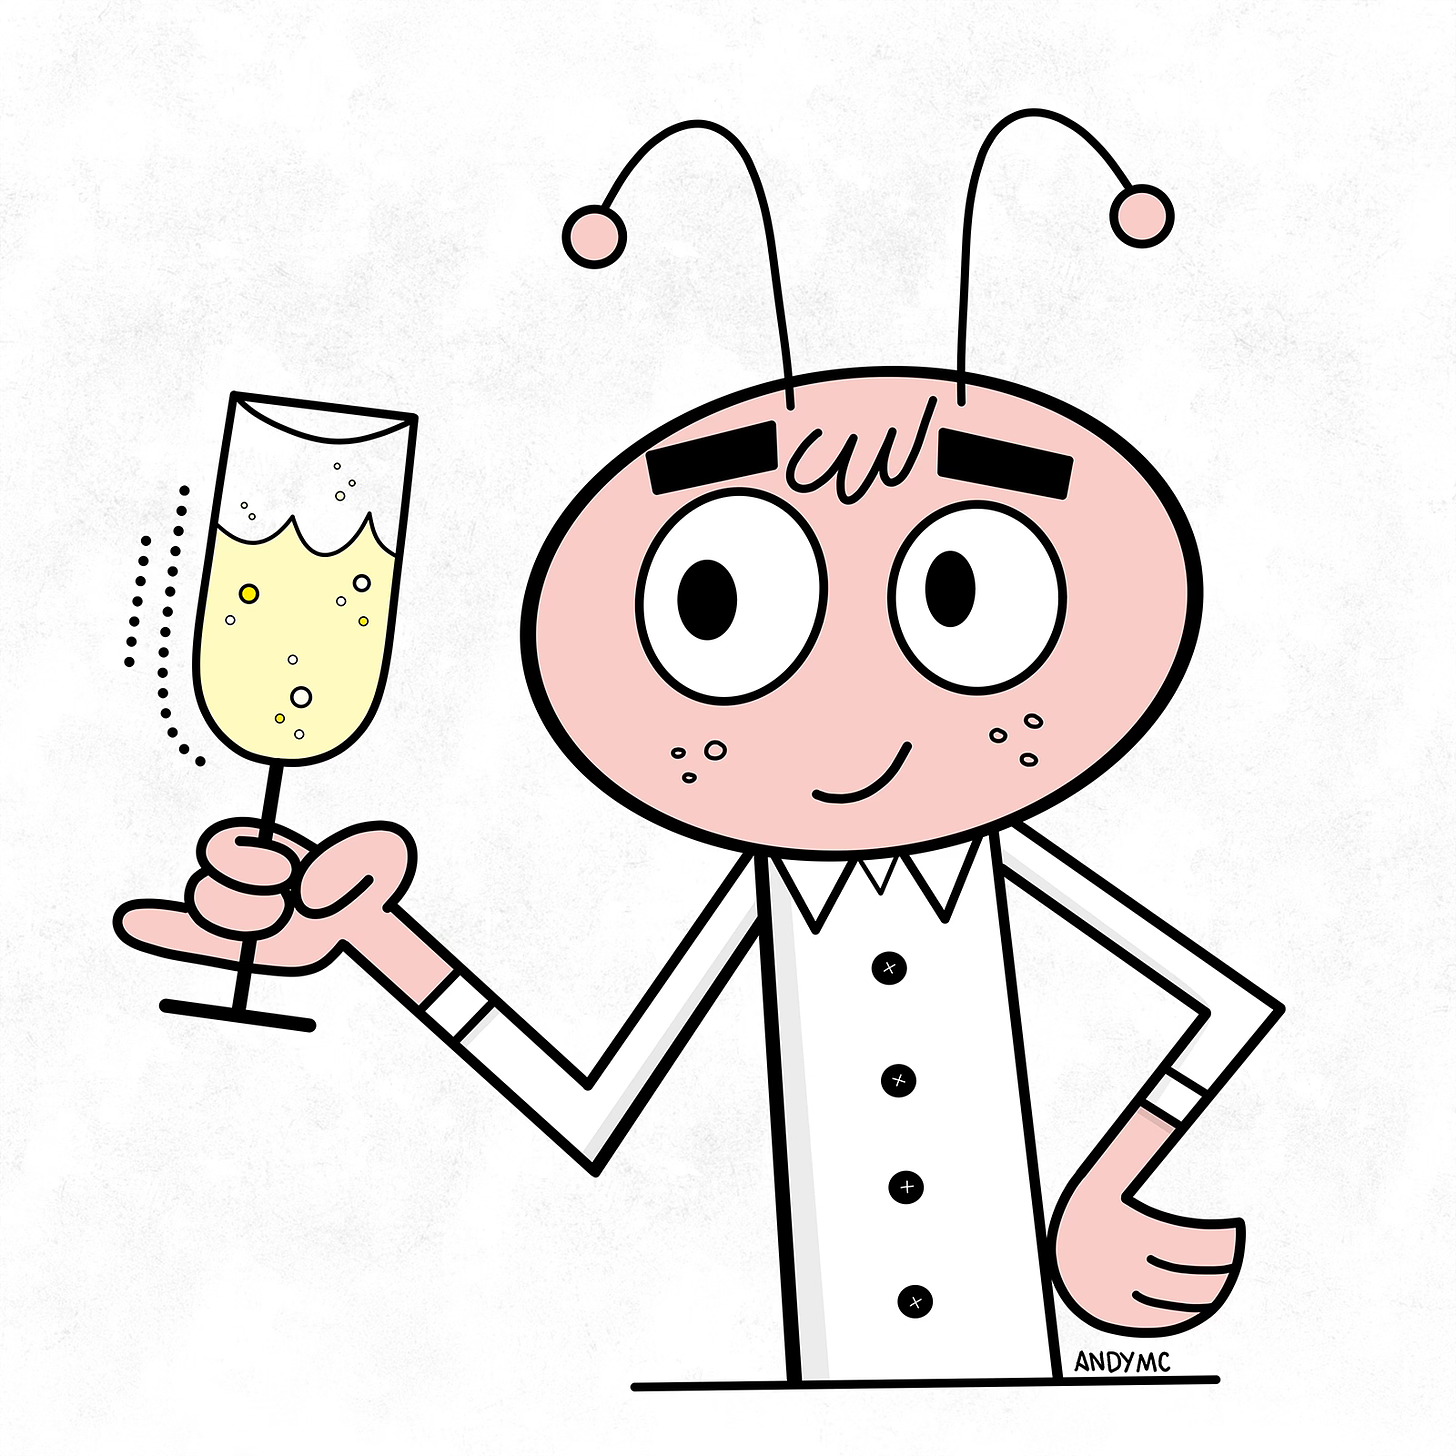 An illustration of an Ant raising a glass for a toast.